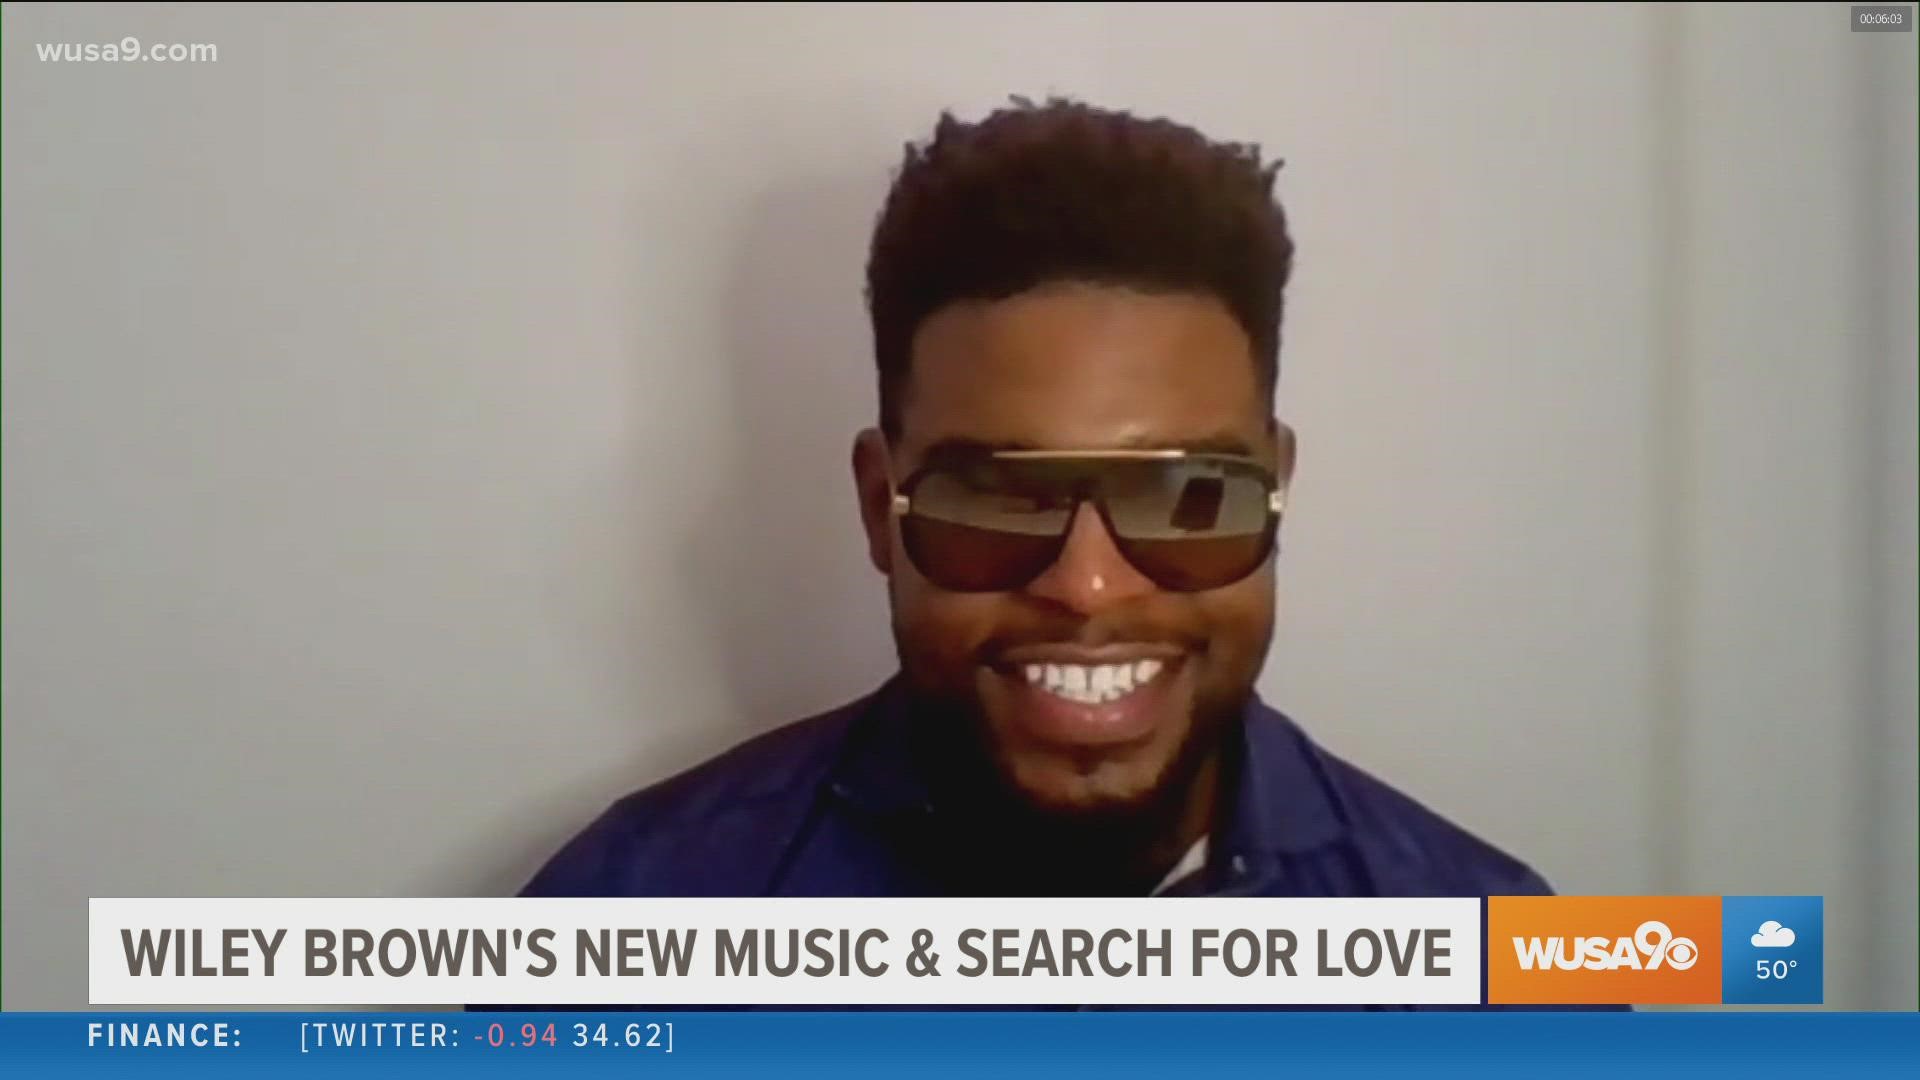 Chuck Brown's son, Wiley, shares his upcoming music projects and his experience on the OWN Network's 'Ready to Love'.